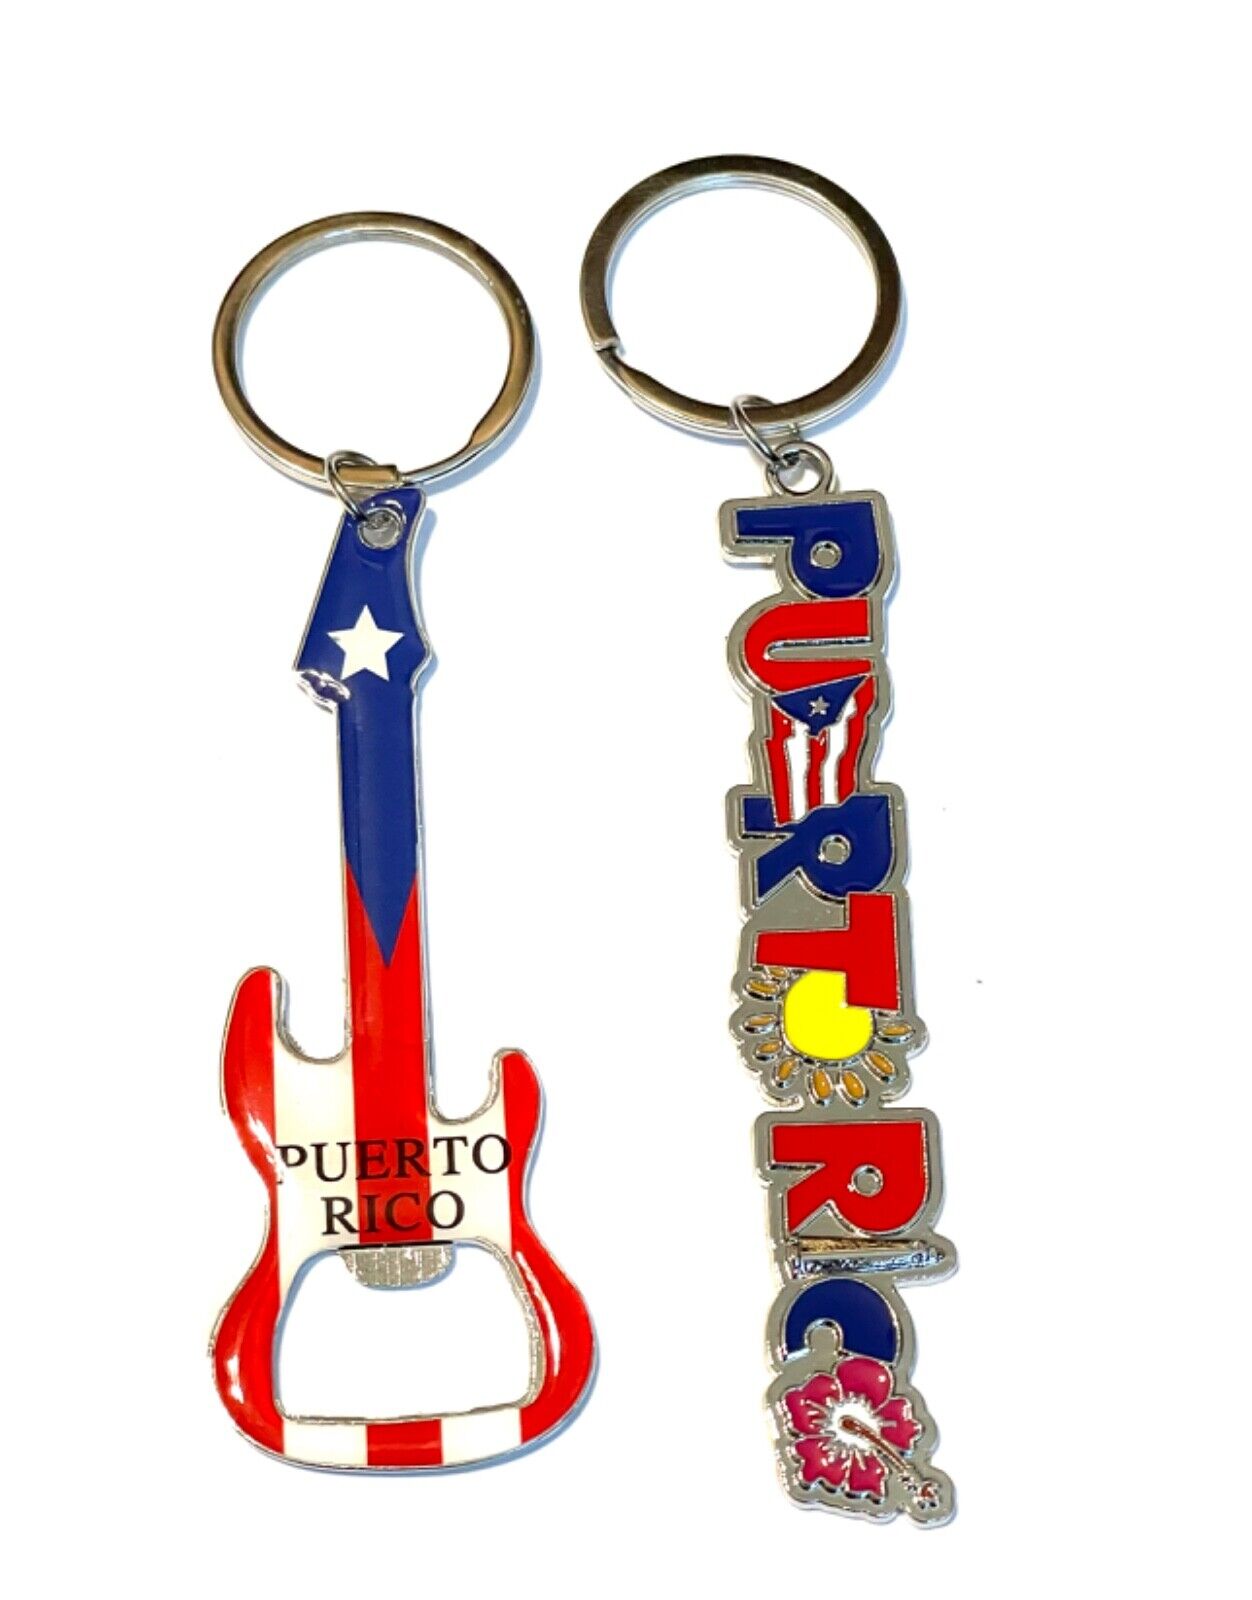 Puerto Rico Souvenir Keychain Set of 2 Guitar shaped and Letters Charm Design